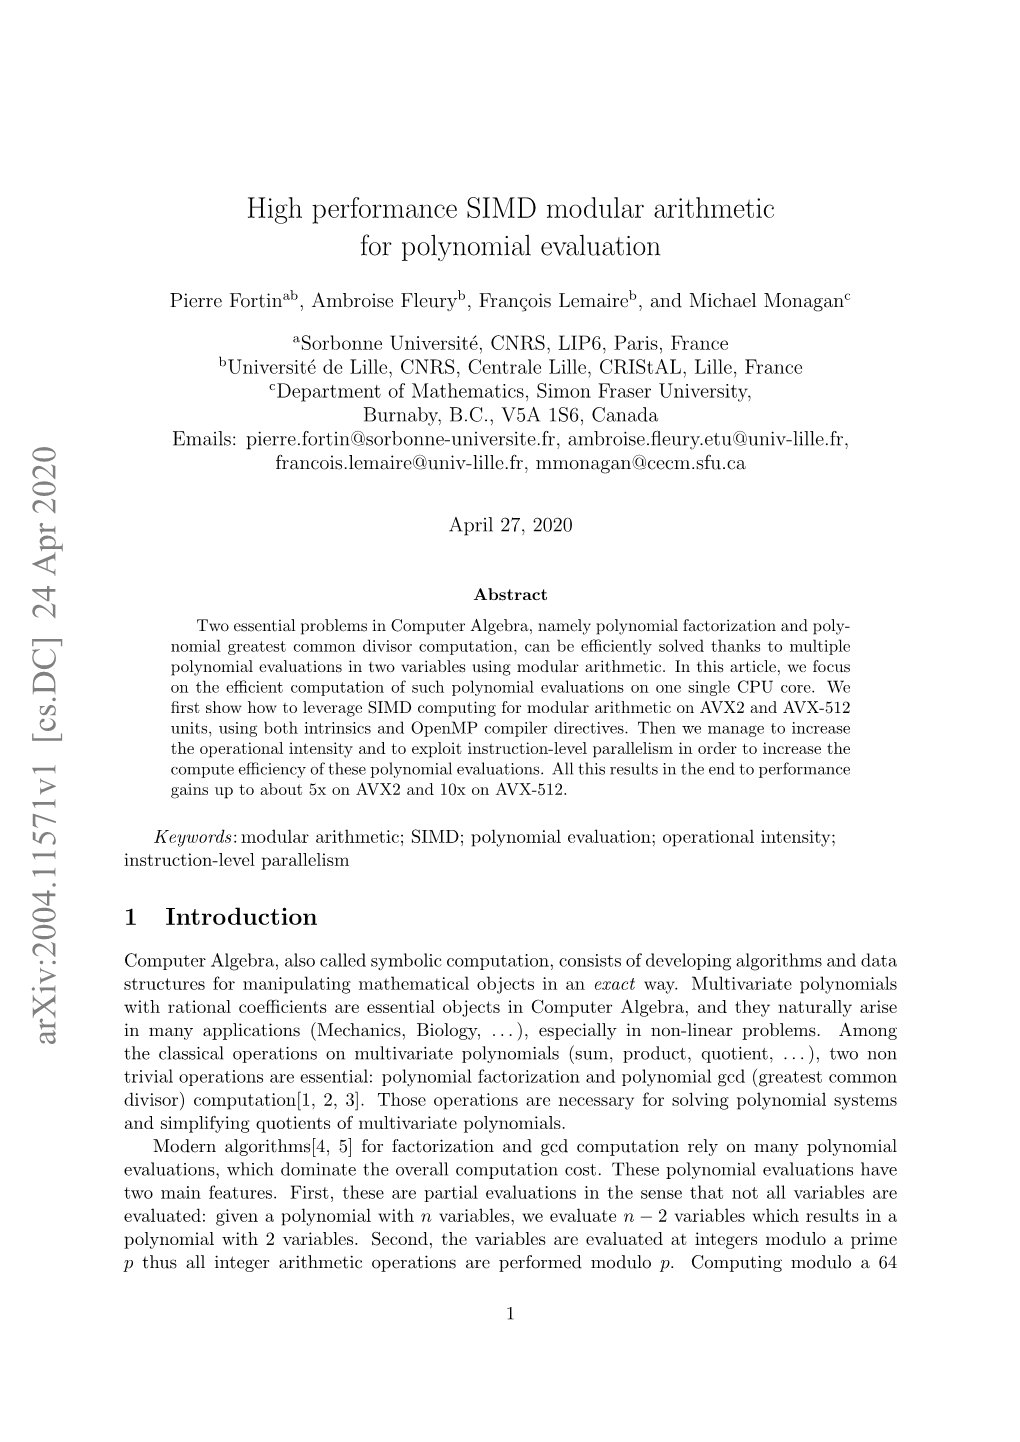 High Performance SIMD Modular Arithmetic for Polynomial Evaluation